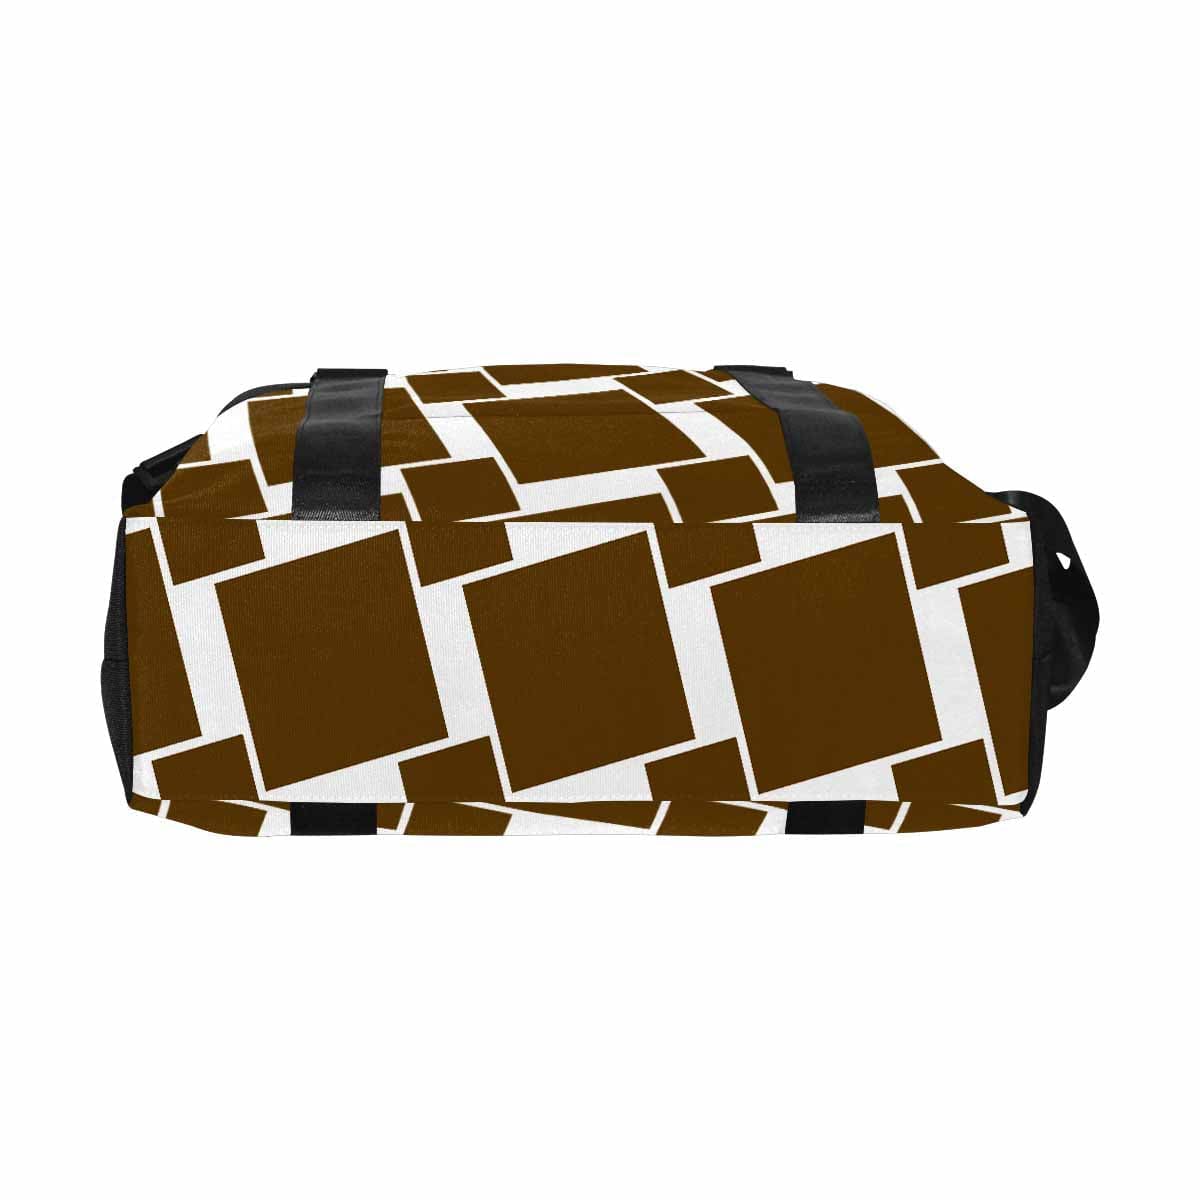 Duffle Bag - Large Capacity - Brown - Bags | Travel Bags | Canvas Carry